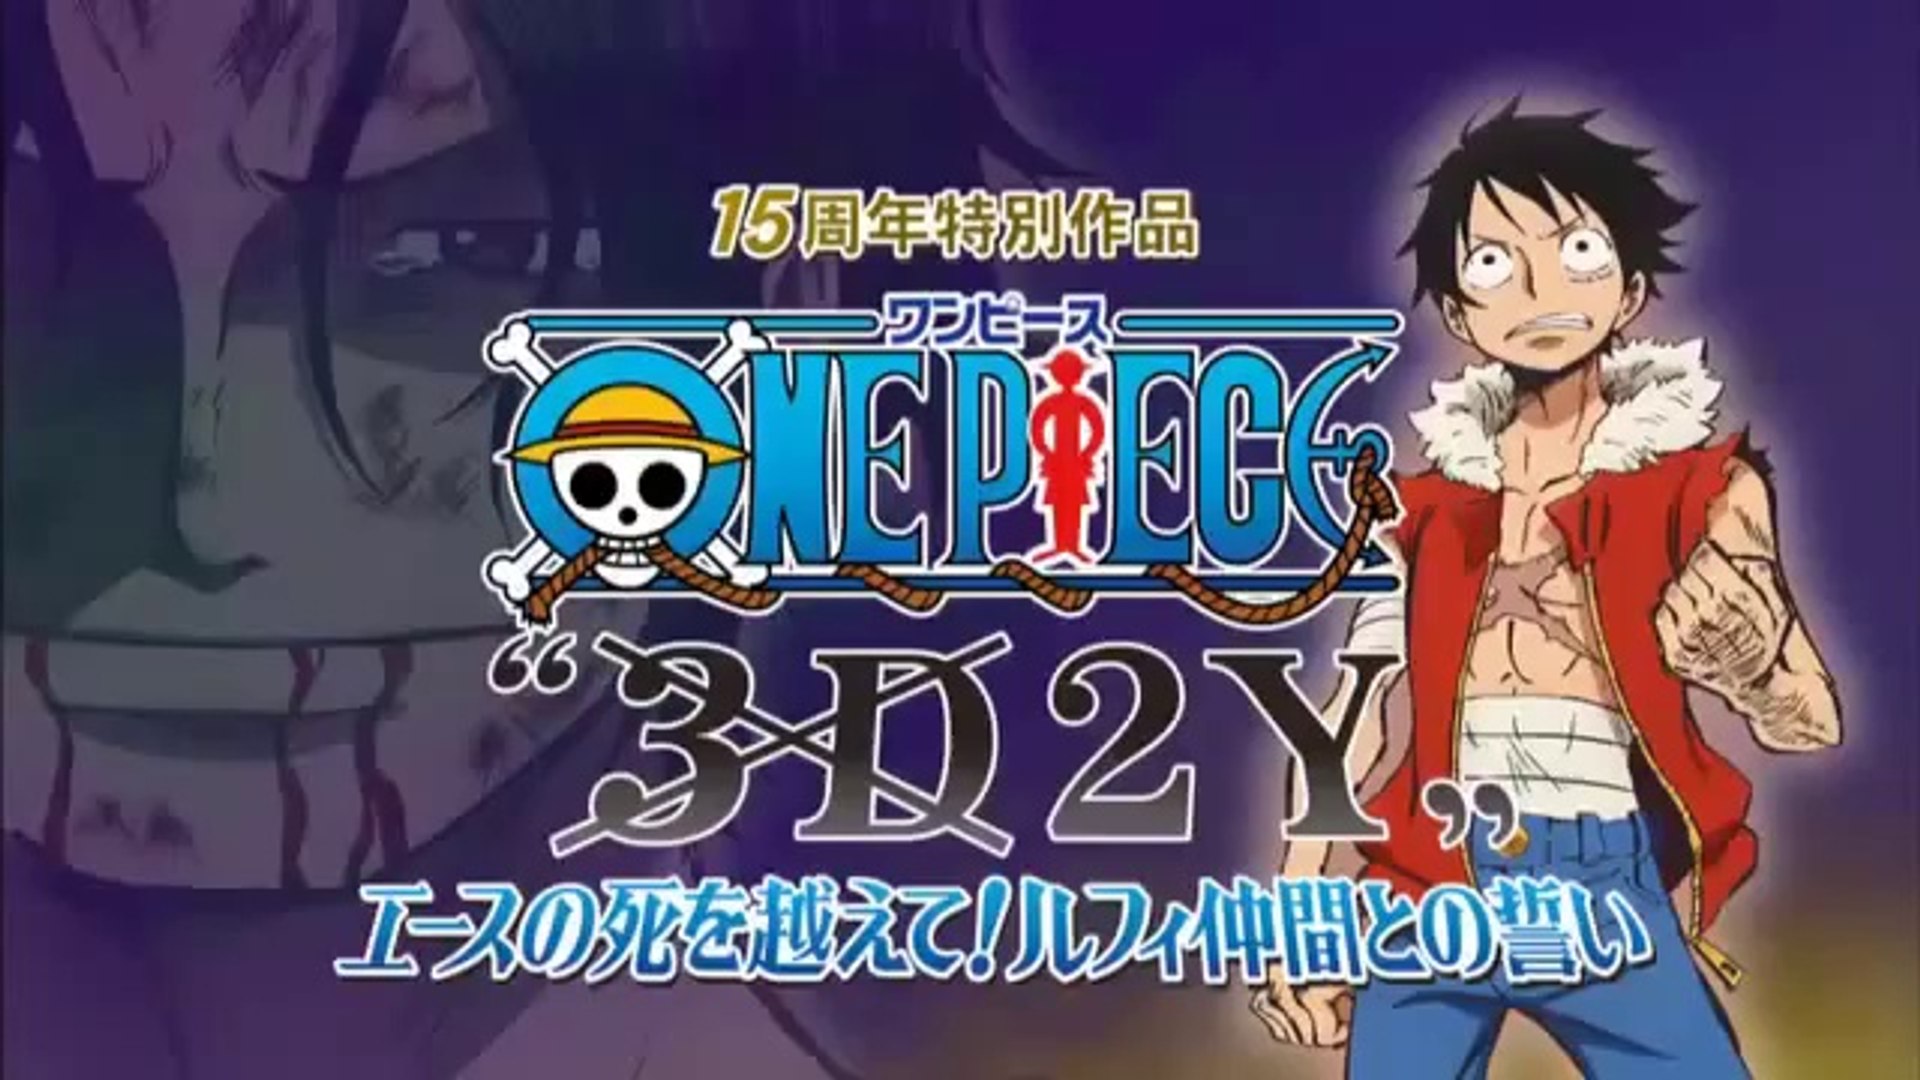 One Piece 3d2y Teaser Video Dailymotion